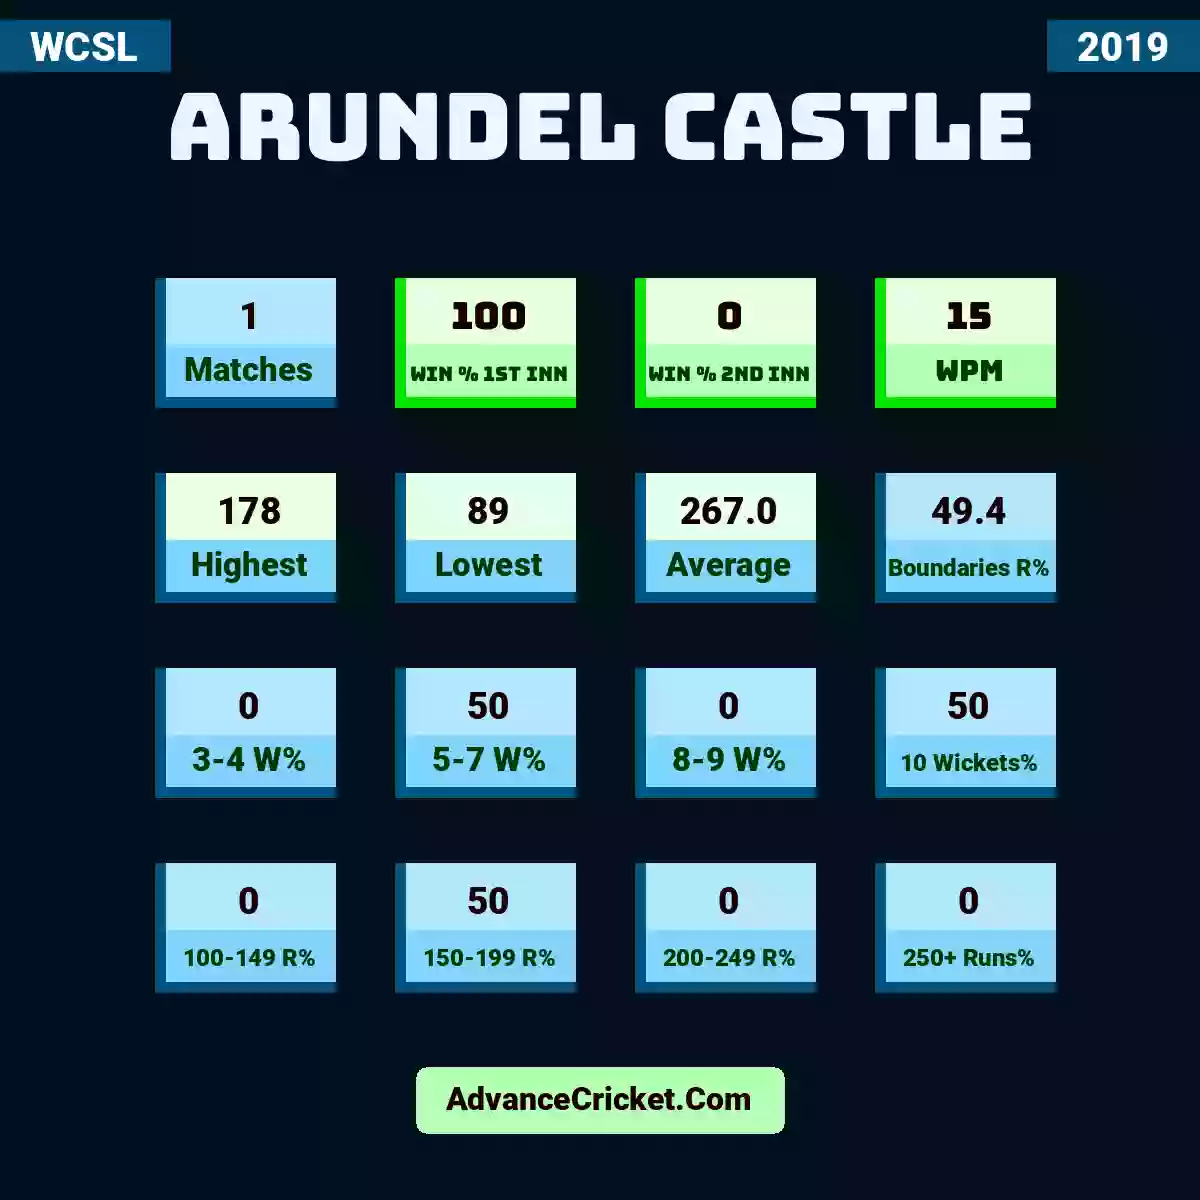 Image showing Arundel Castle with Matches: 1, Win % 1st Inn: 100, Win % 2nd Inn: 0, WPM: 15, Highest: 178, Lowest: 89, Average: 267.0, Boundaries R%: 49.4, 3-4 W%: 0, 5-7 W%: 50, 8-9 W%: 0, 10 Wickets%: 50, 100-149 R%: 0, 150-199 R%: 50, 200-249 R%: 0, 250+ Runs%: 0.